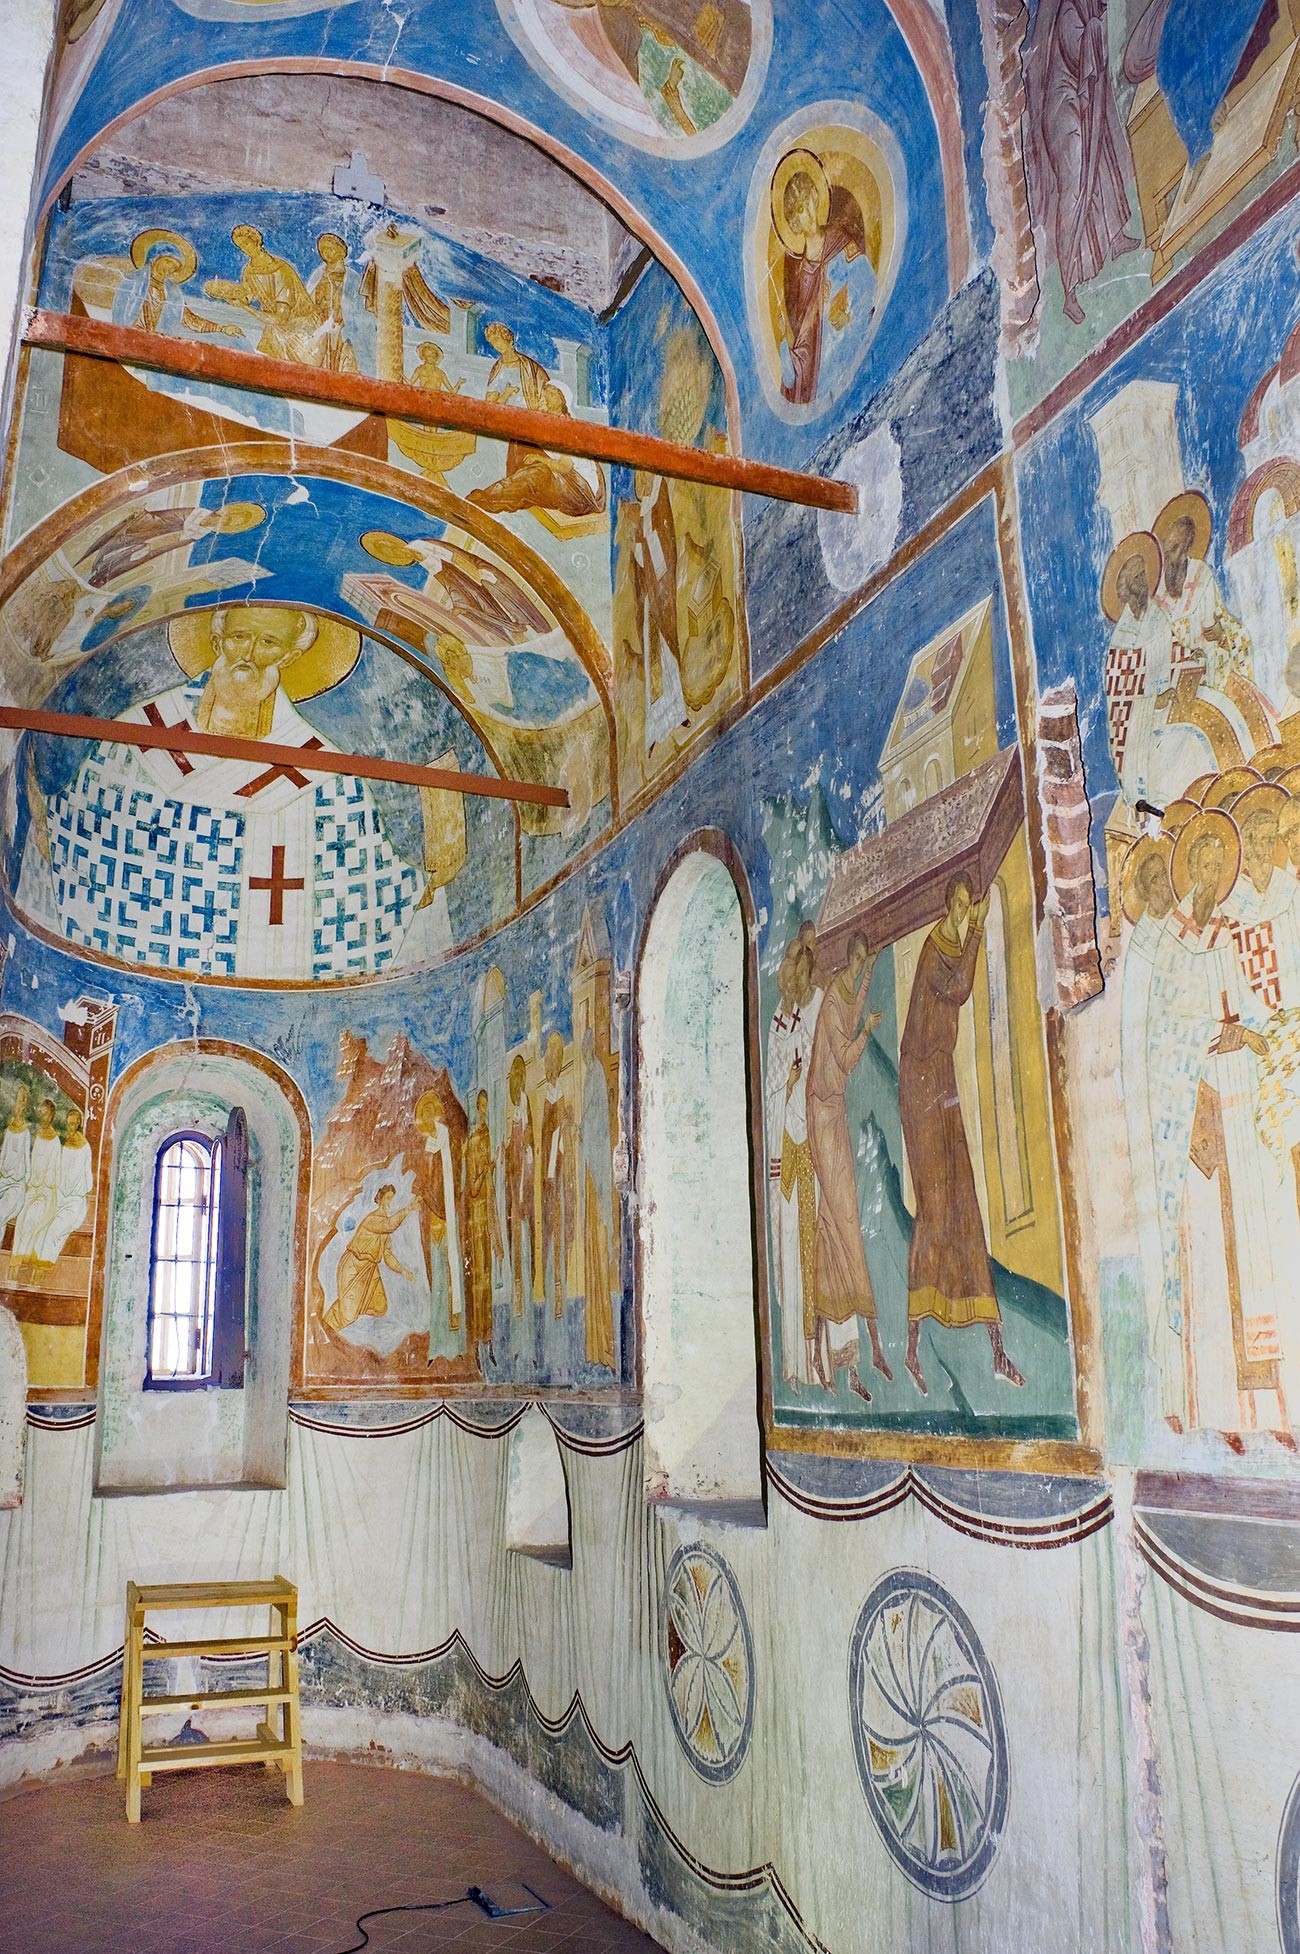 Cathedral of Nativity. South apse with frescoes of St. Nicholas. June 1, 2014 